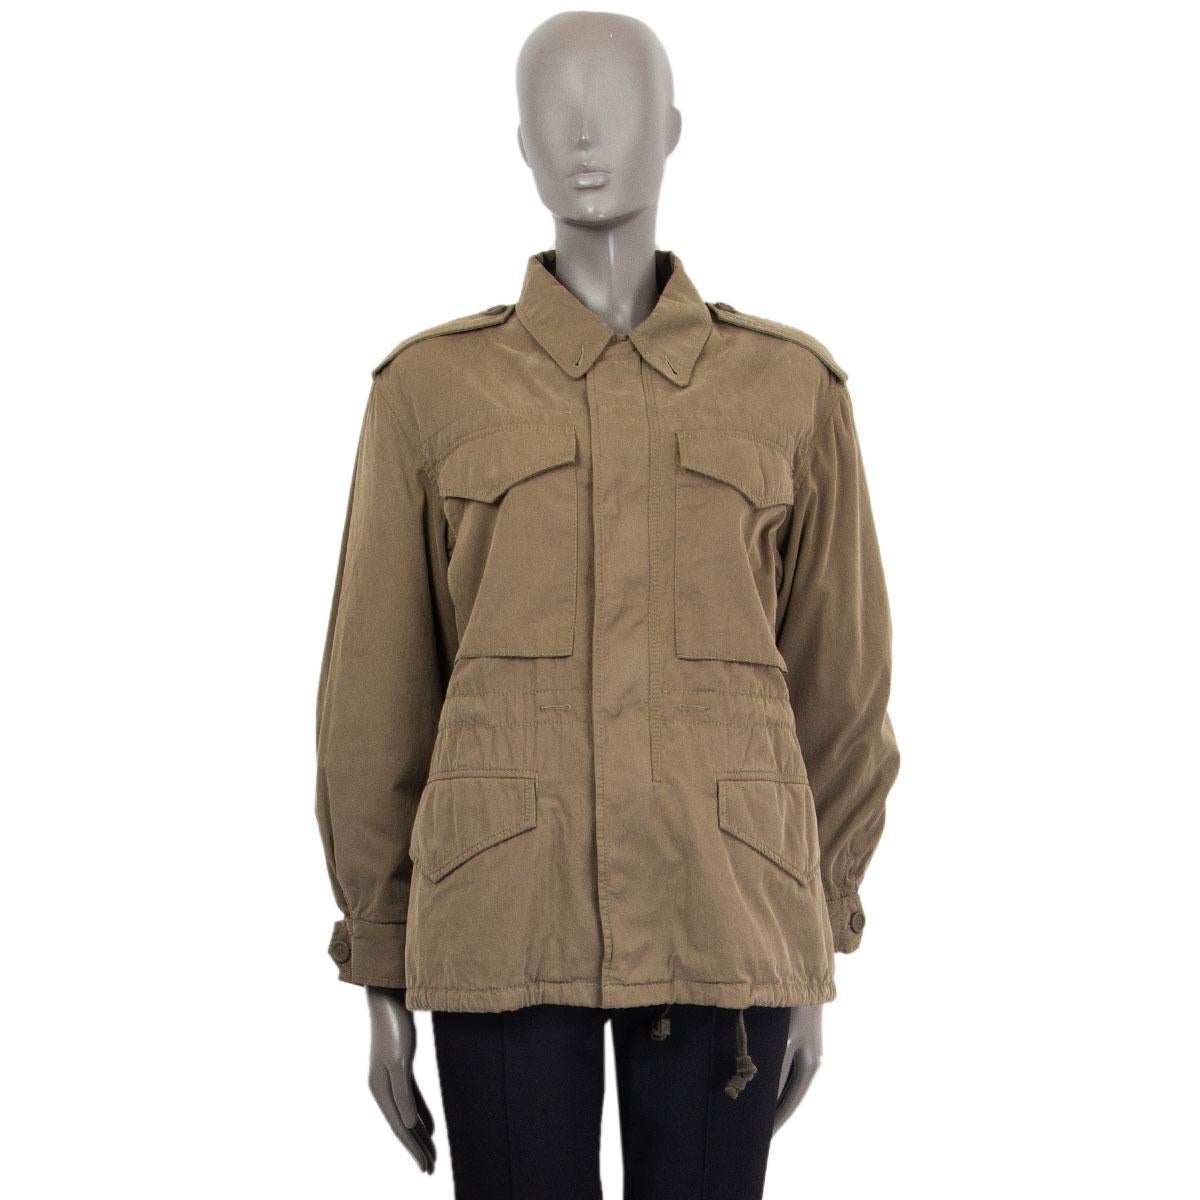 Gucci parka jacket in army green cotton (100%) complete with epaulettes and cargo pockets. The label's logo is printed across the back in yellow, green, red and black. Concealed snaps and zip fastening through front. Comes with a detachable cozy